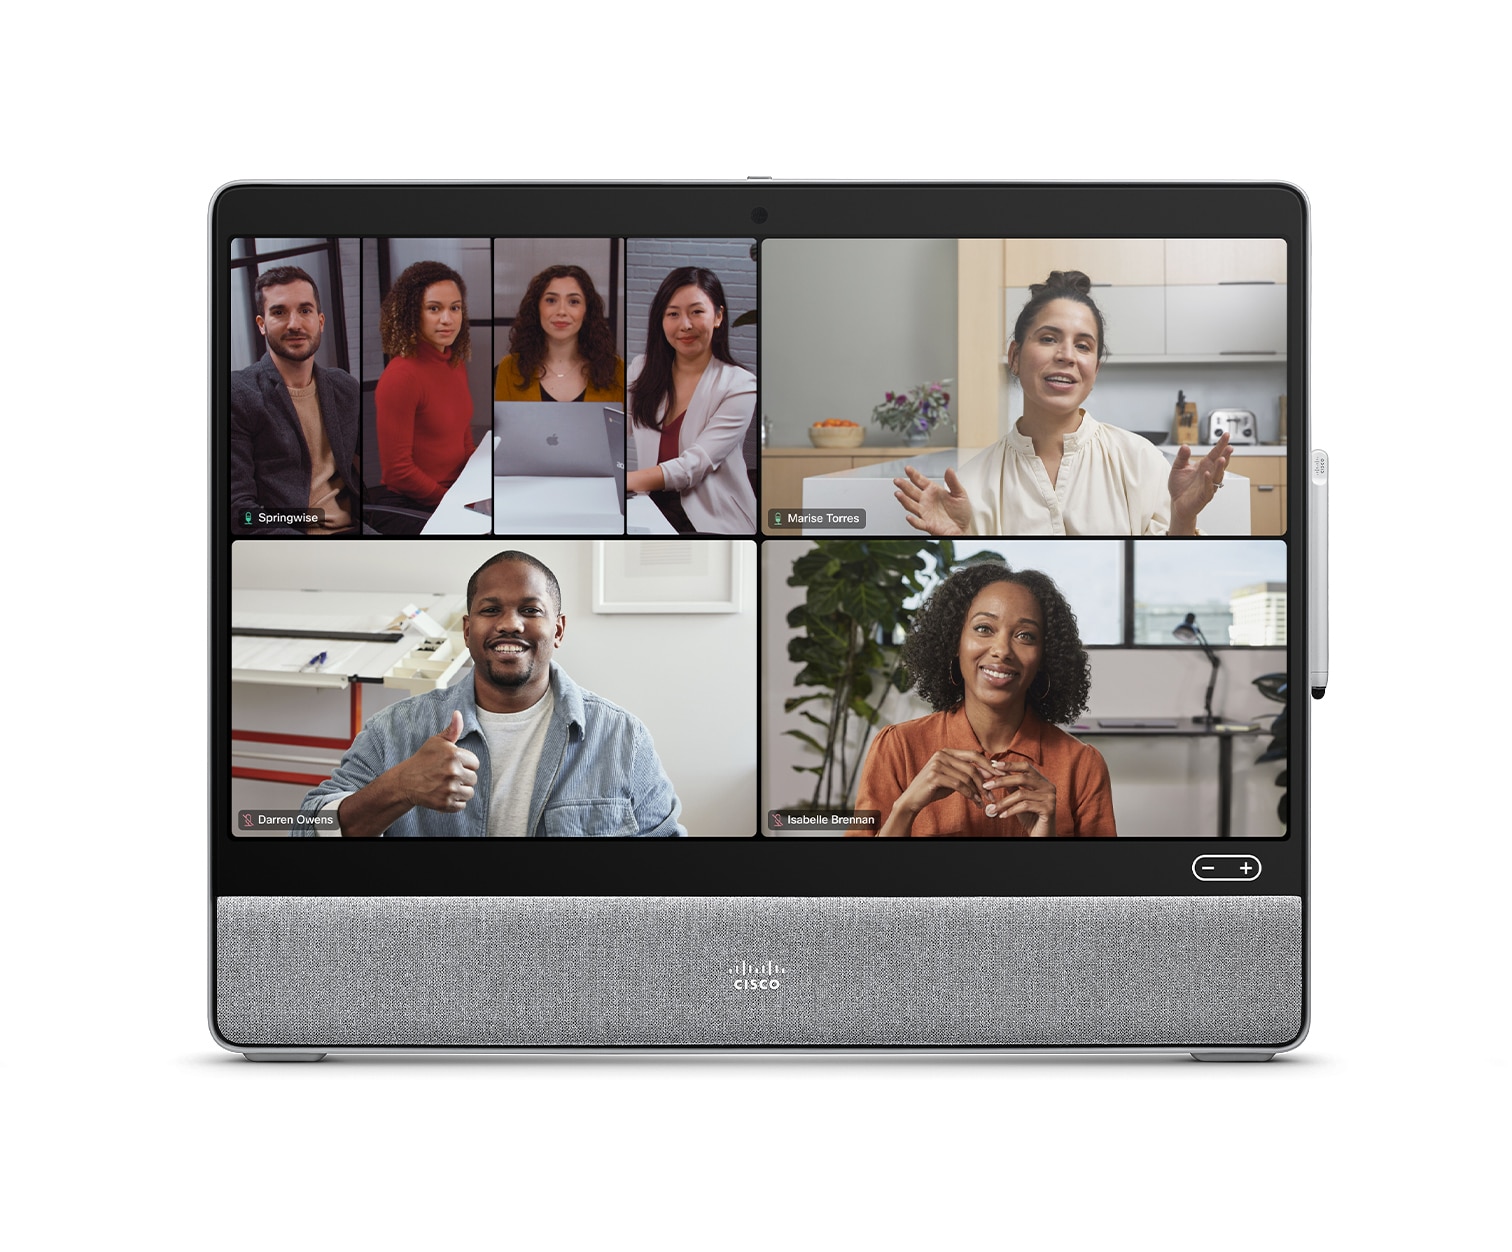 Frames view on Cisco Desk device with Webex meeting platform and 4 people selected for video conference.